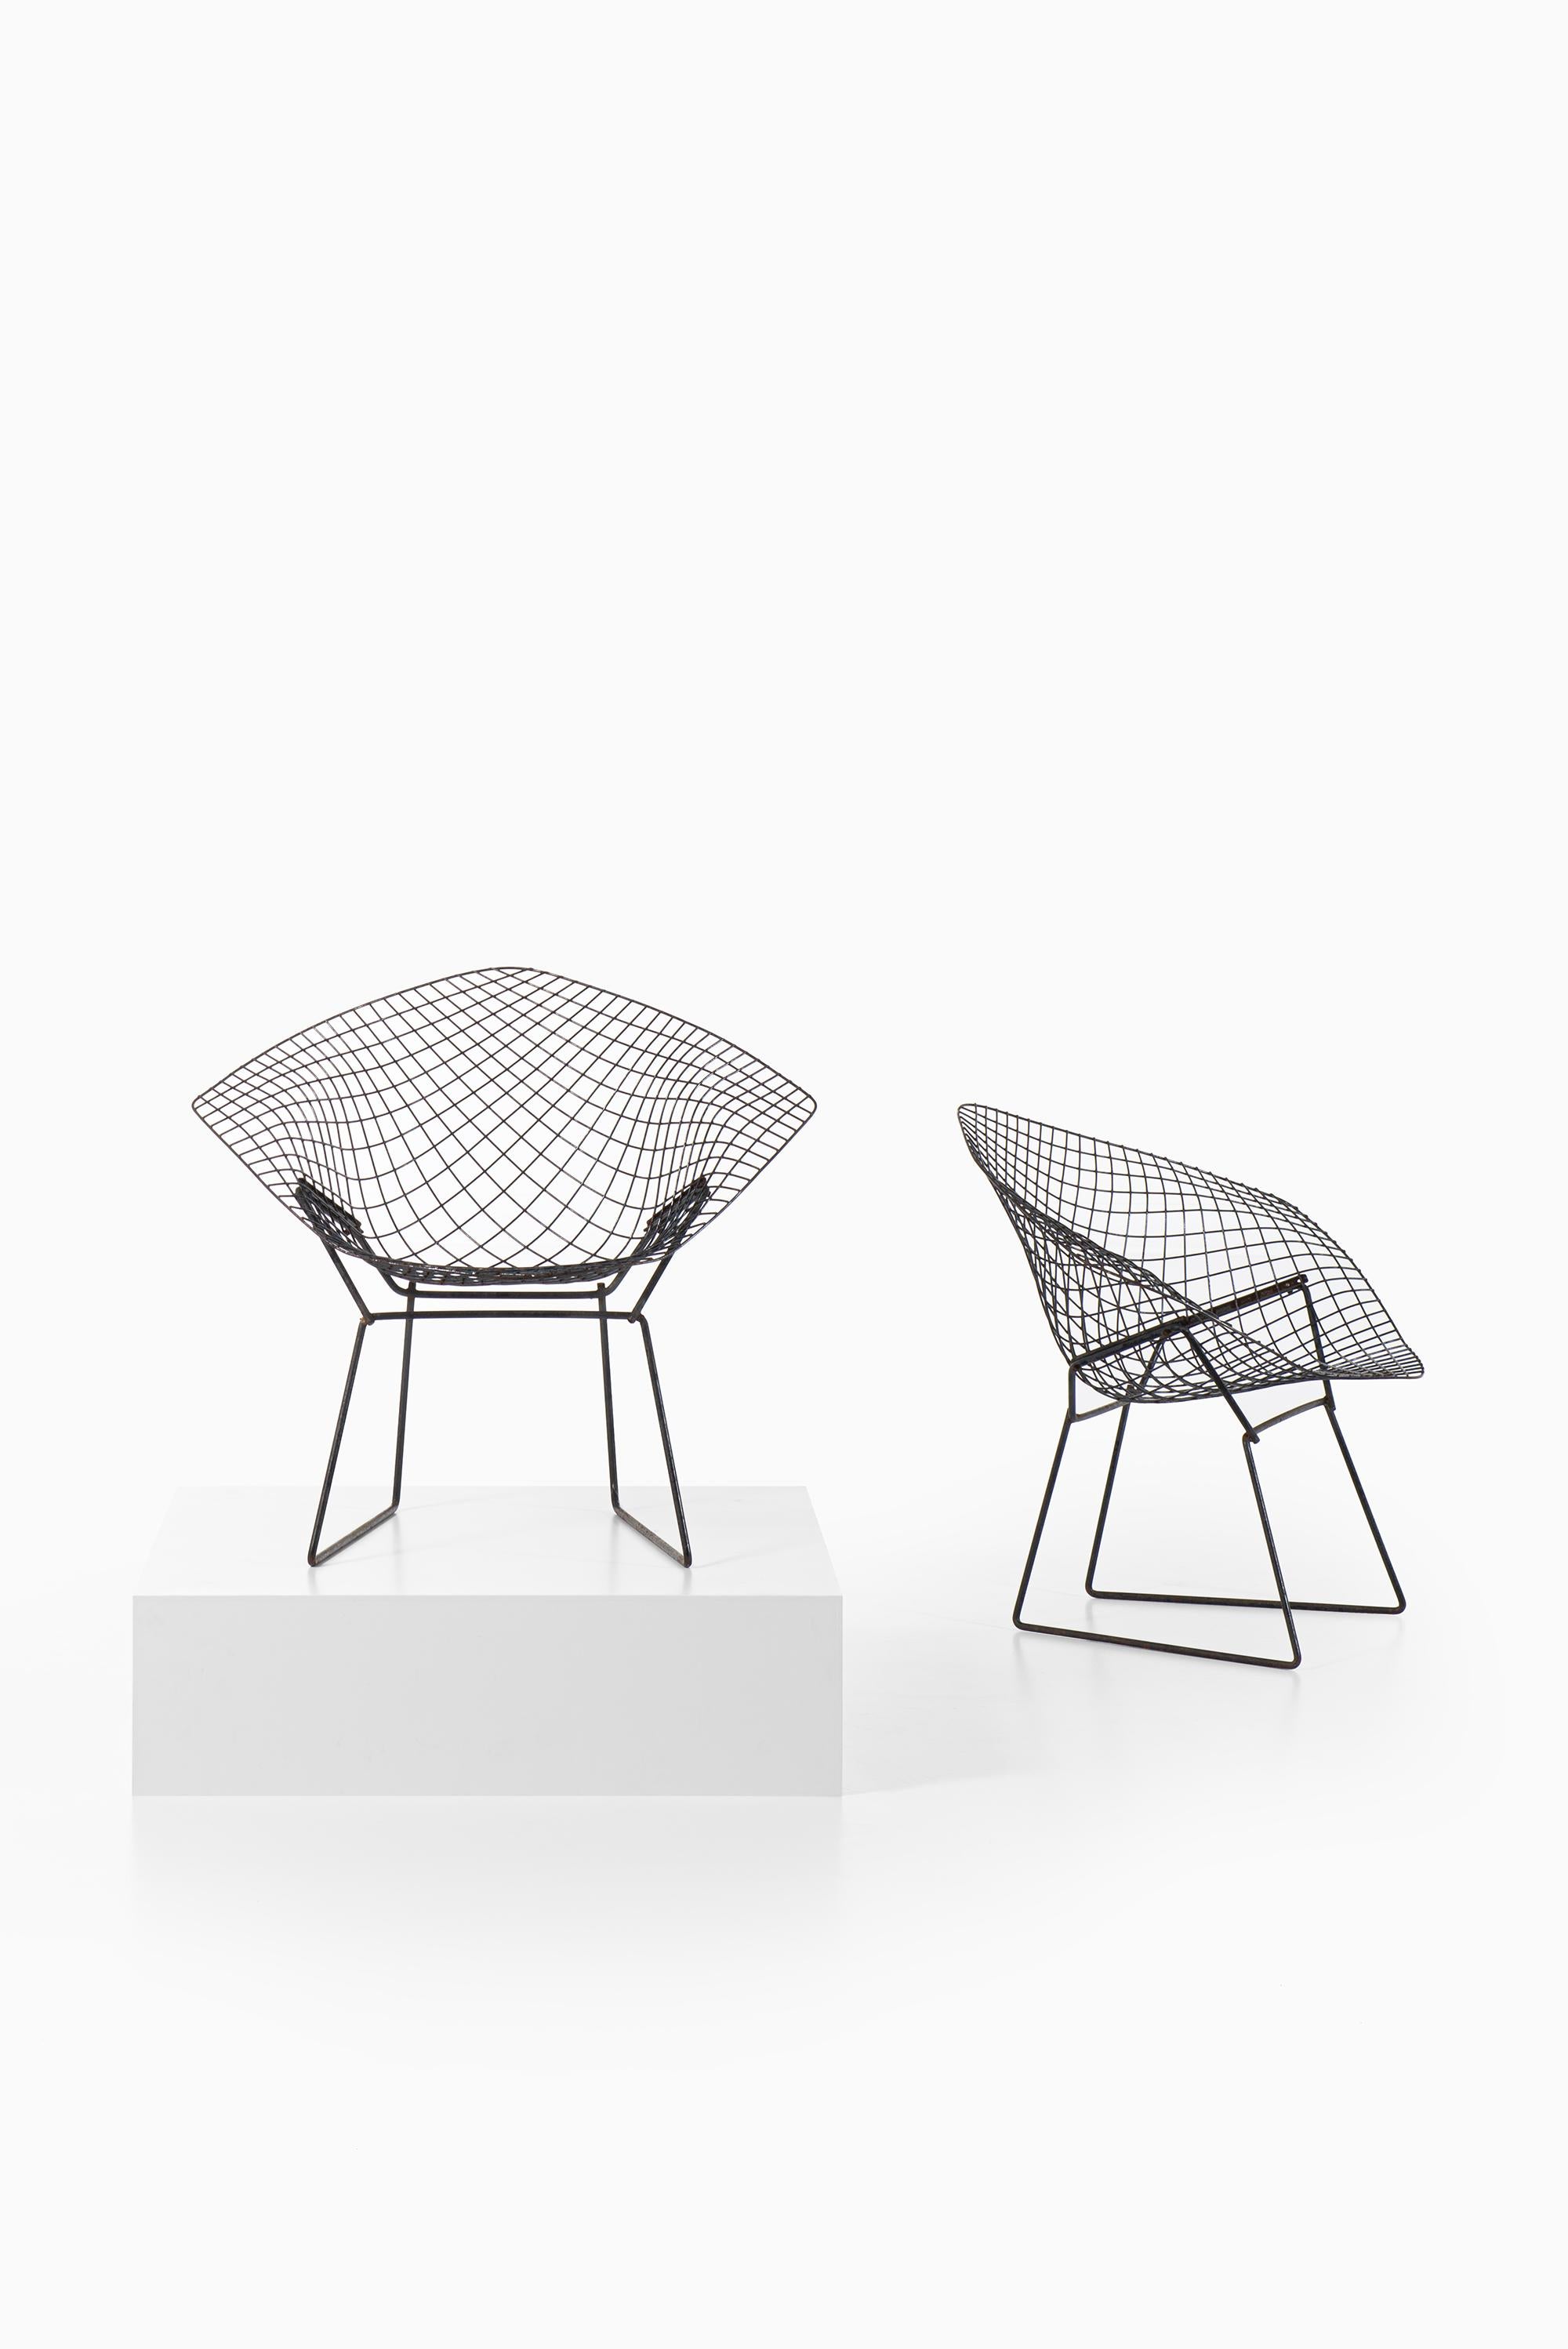 Pair of diamond easy chairs designed by Harry Bertoia. Produced by Knoll in America.